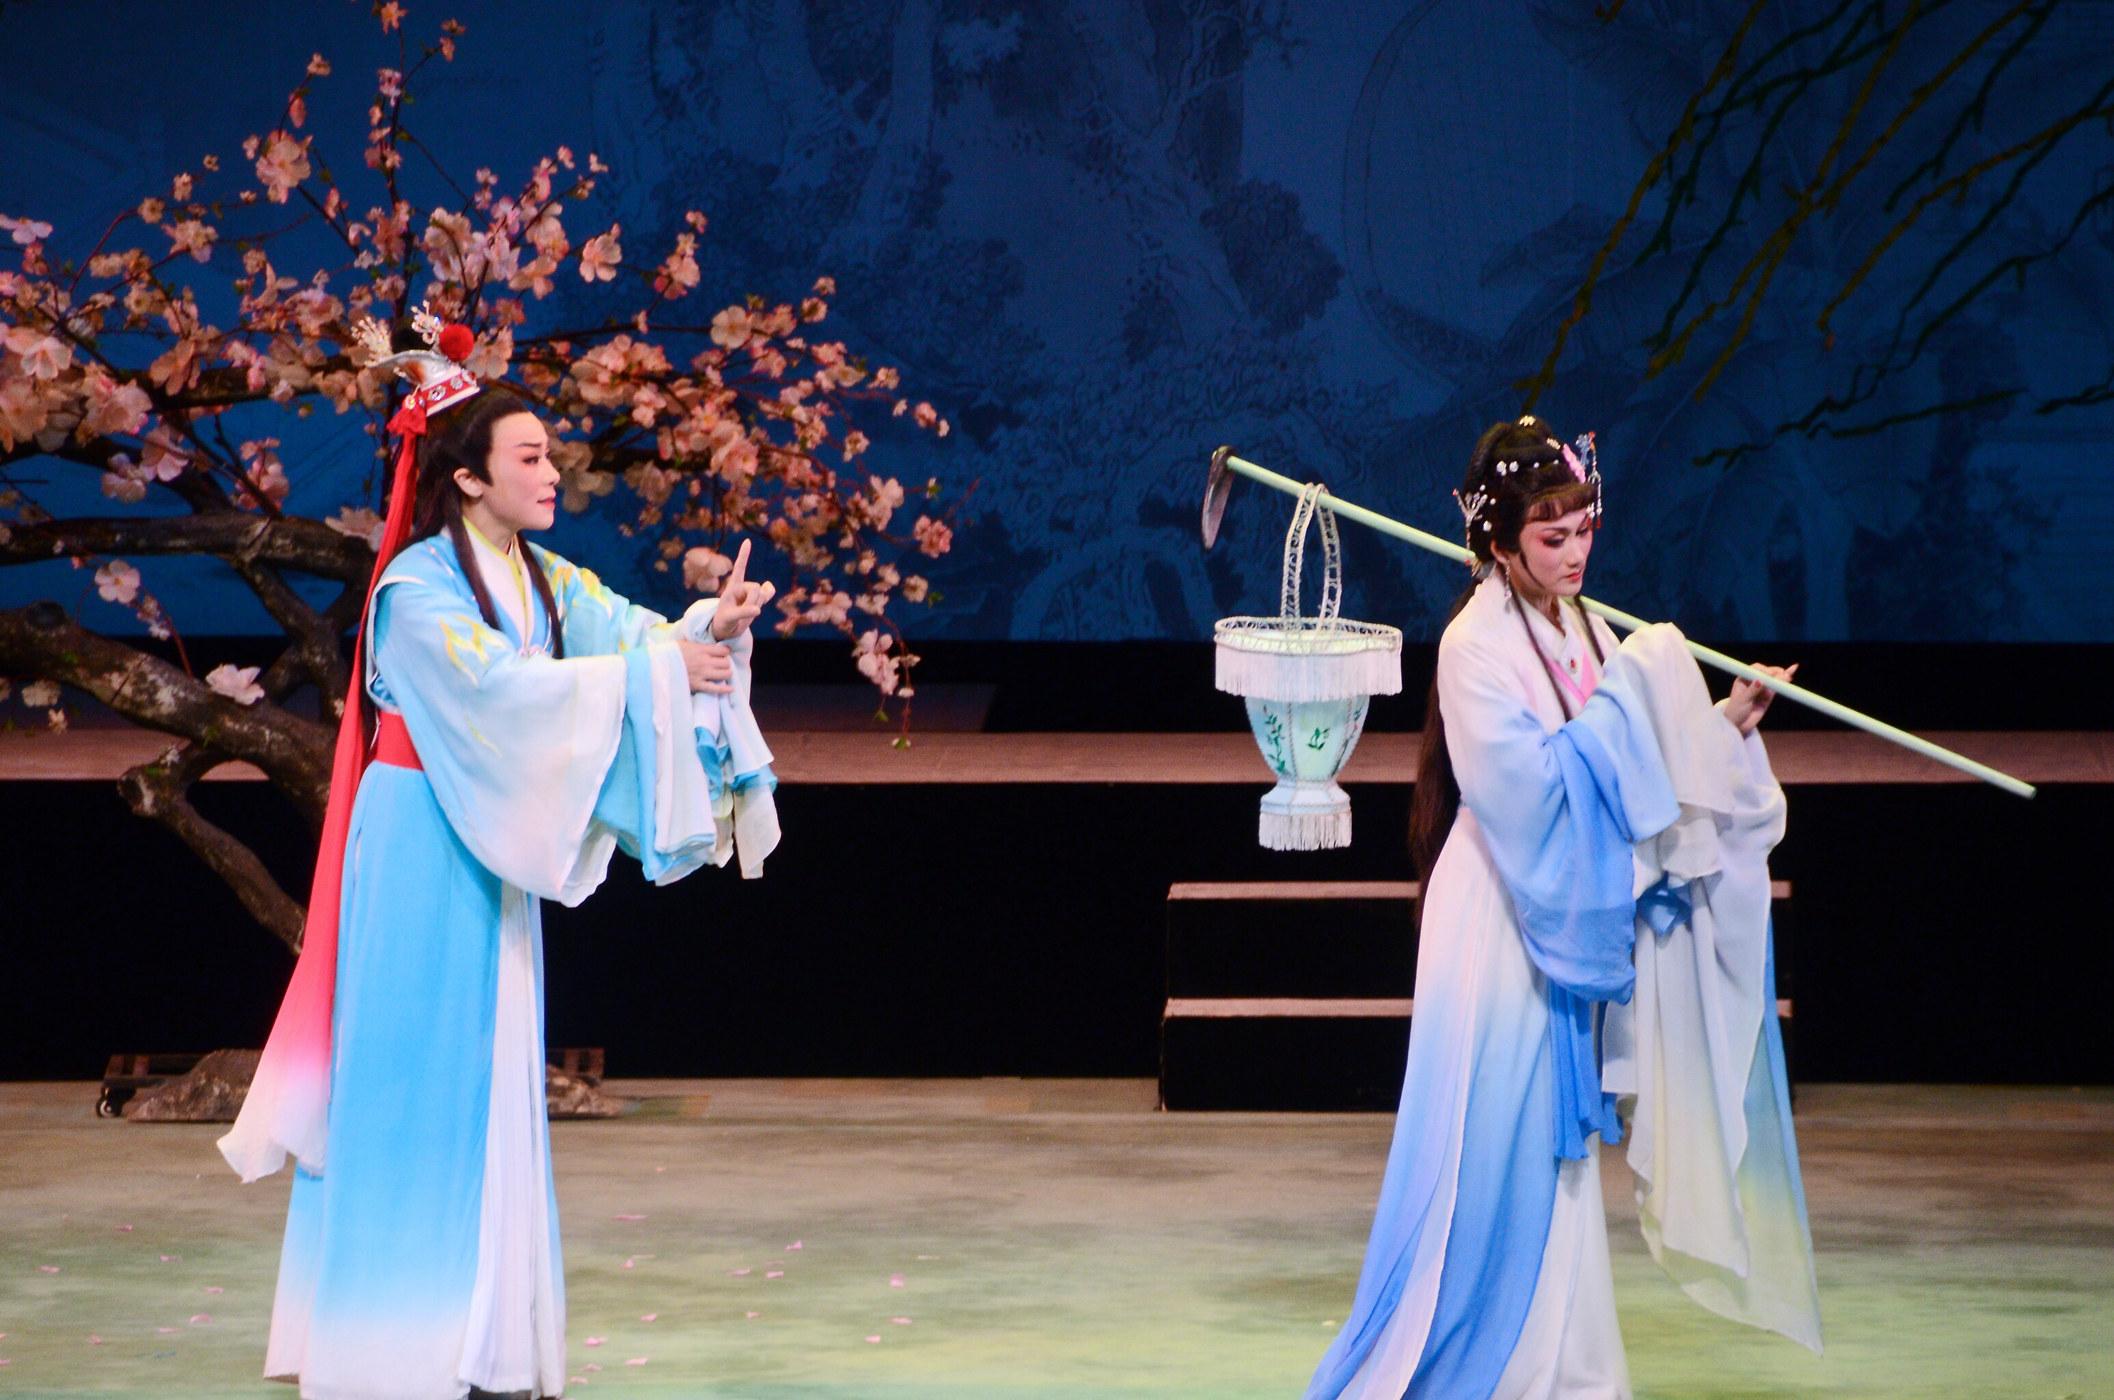 Over 10 renowned winners of the China Theatre Plum Blossom Award of Yue opera will visit Hong Kong for the programme "A Stellar Meet featuring Plum Blossom Award Winners in Yue Opera" under the Chinese Opera Festival 2023 in August. Photo shows a scene from "The Dream of the Red Chamber".